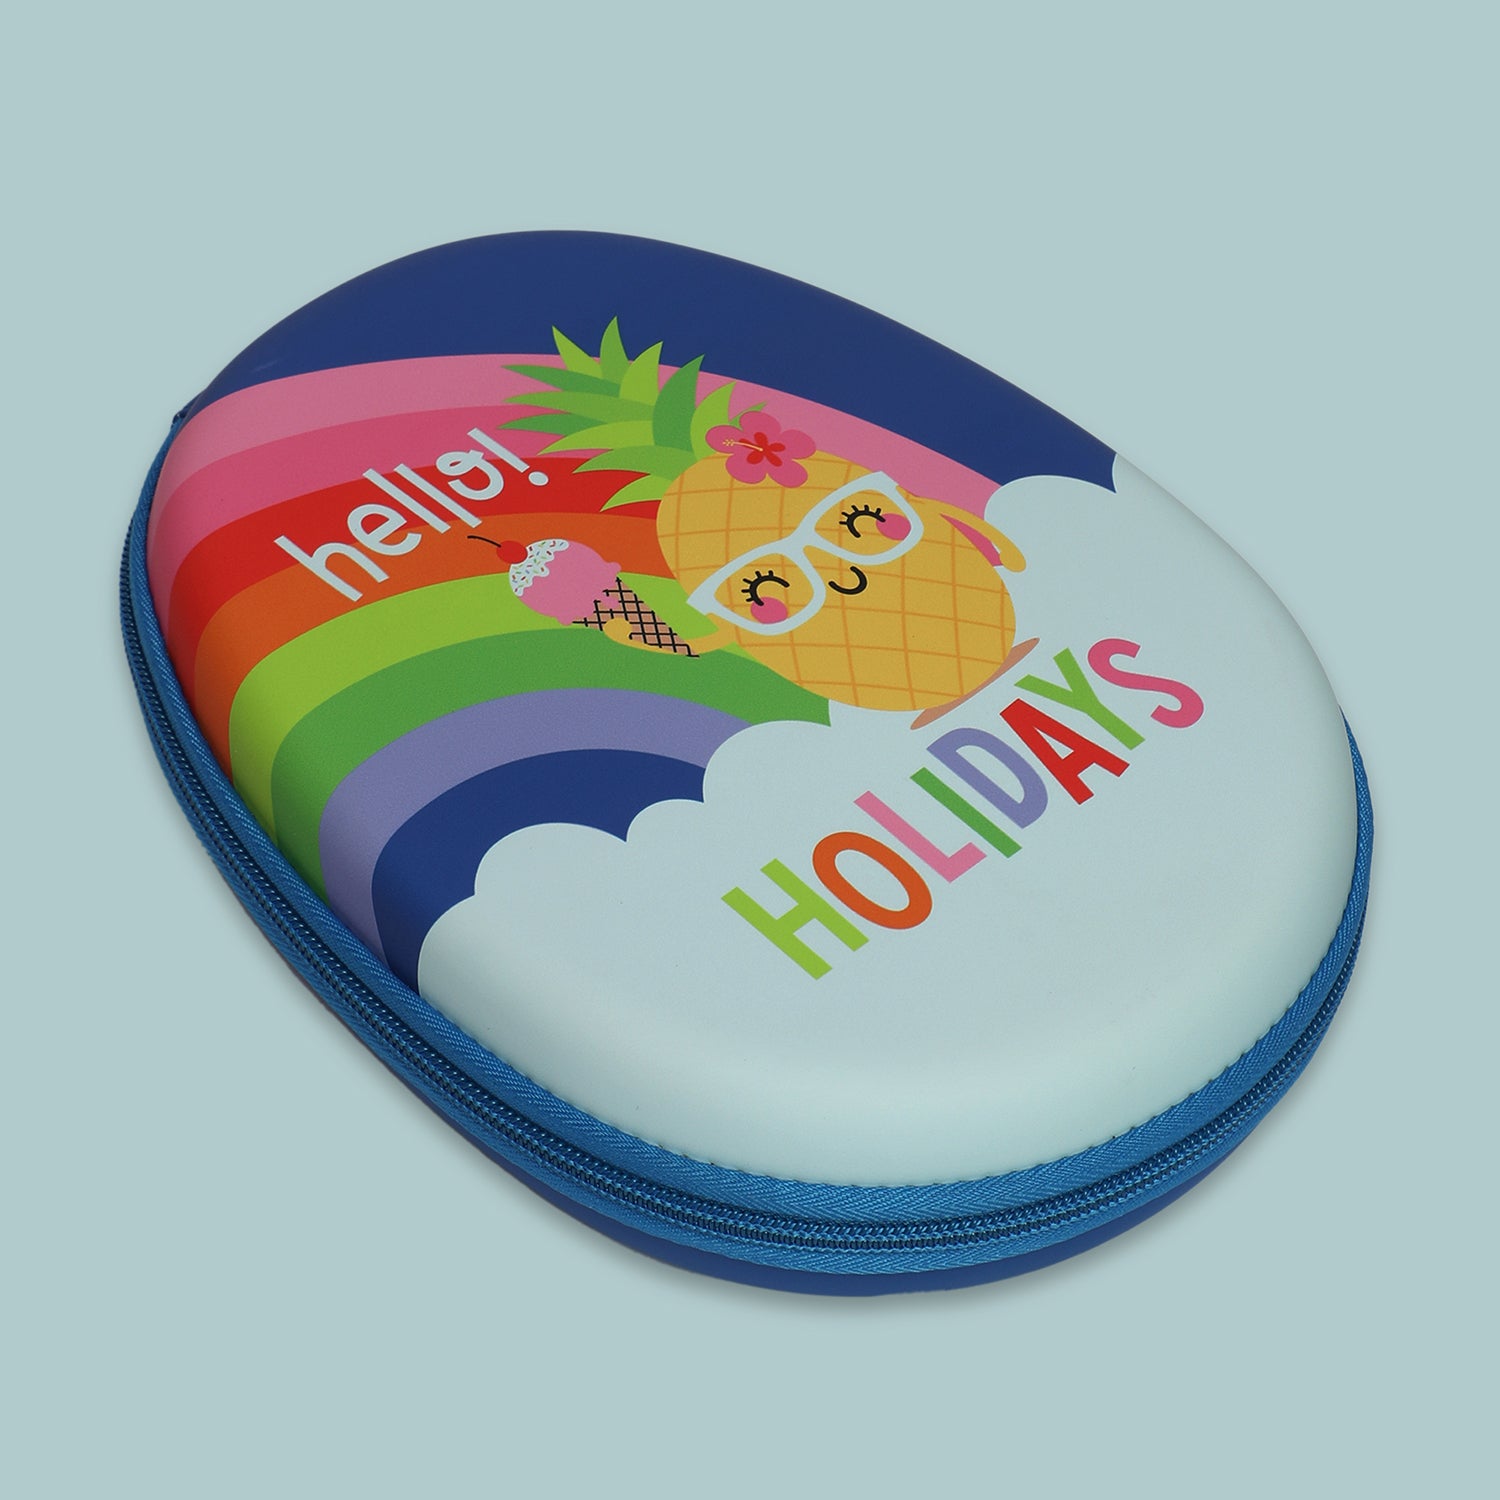 ZORSE OVAL hard pencil case hello holidays with multipurpose use